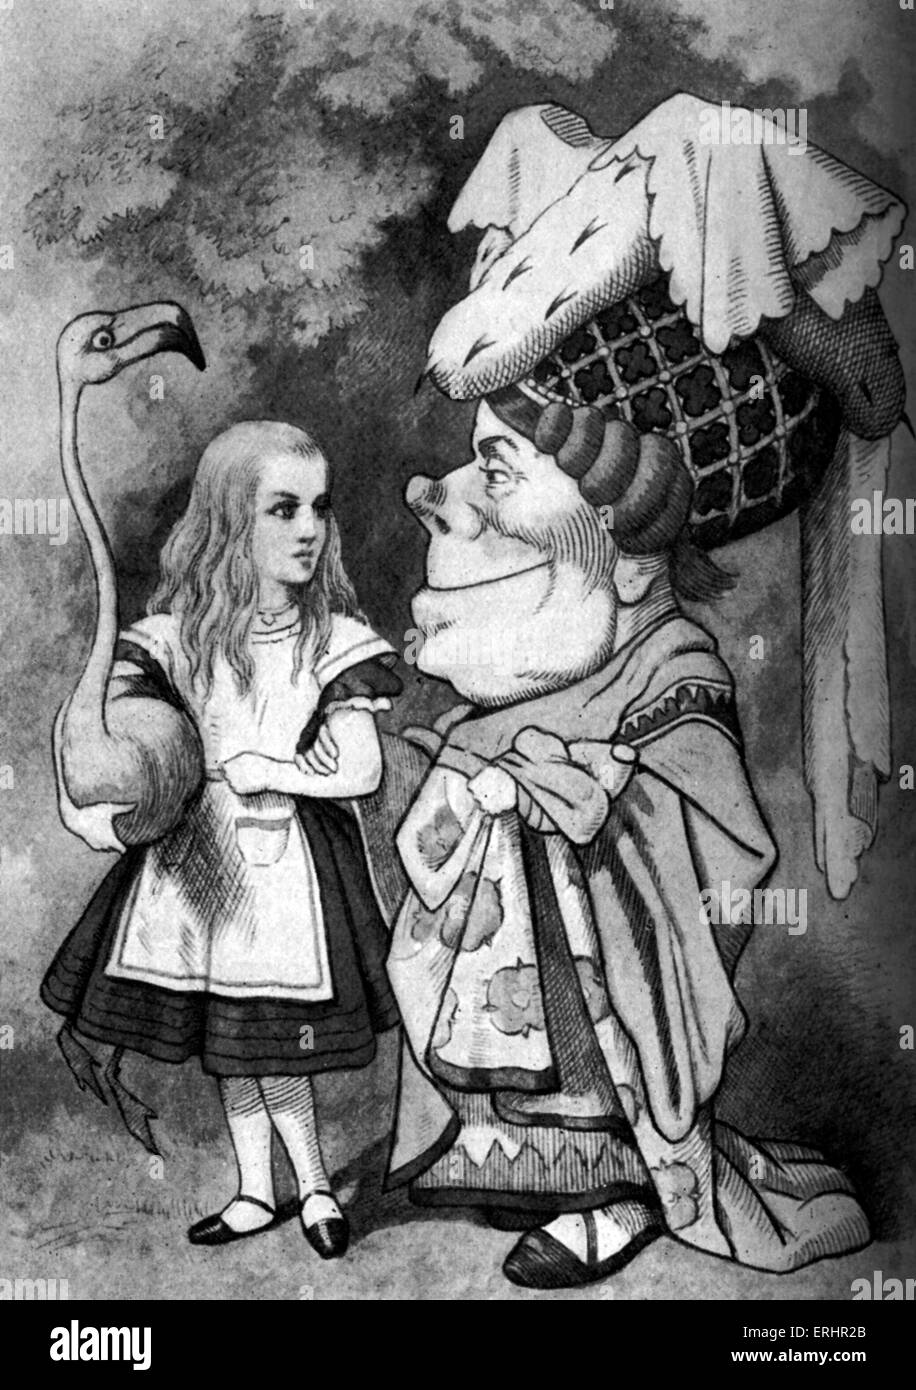 Alice in Wonderland - with the Duchess. From 'Alice's adventures in Wonderland' by Lewis Carroll. LC: English author, 27 January 1832 – 14 January 1898. Illustration by John Tenniel: 28 February 1820 – 25 February 1914. Stock Photo